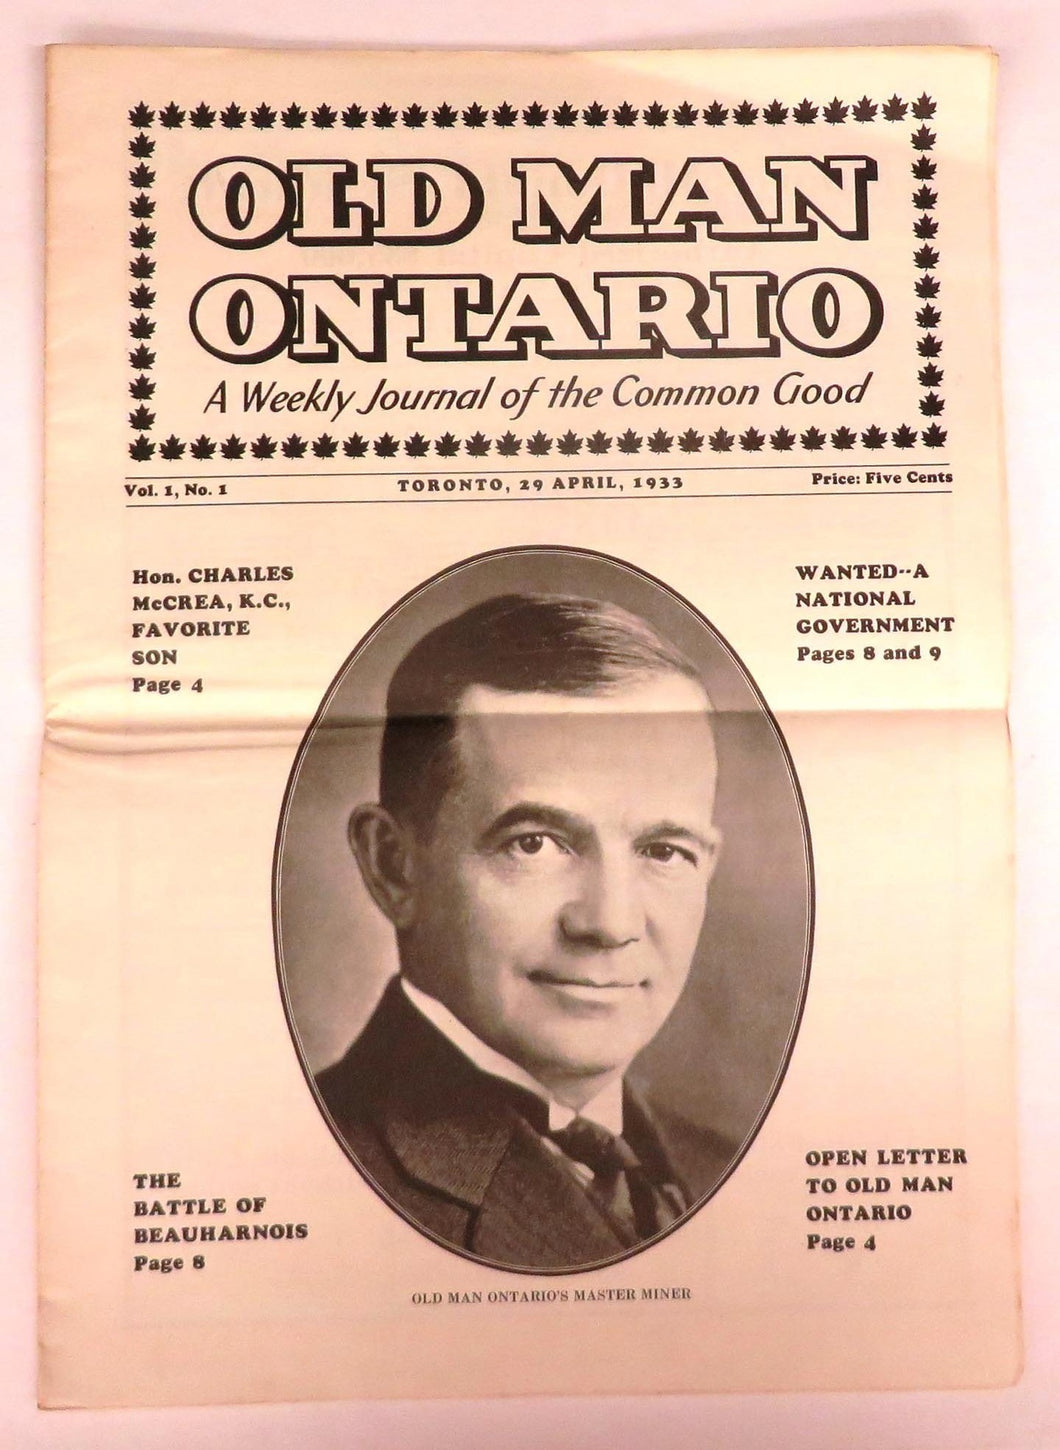 Old Man Ontario: A Weekly Journal of the Common Good, April 29, 1933